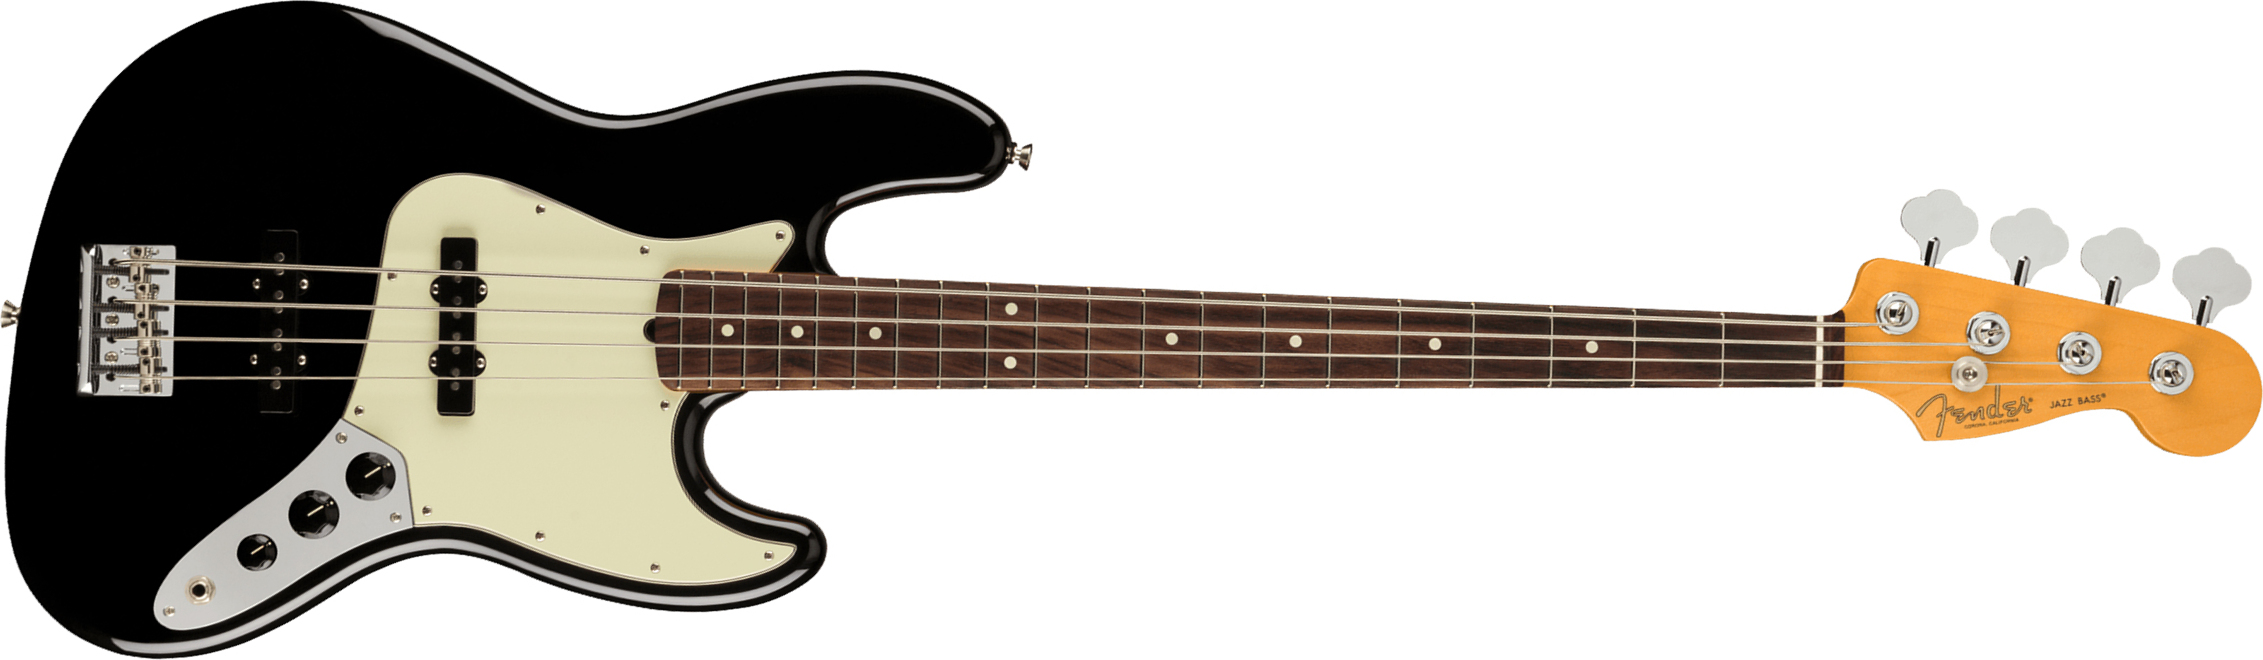 Fender Jazz Bass American Professional Ii Usa Rw - Black - Solid body electric bass - Main picture